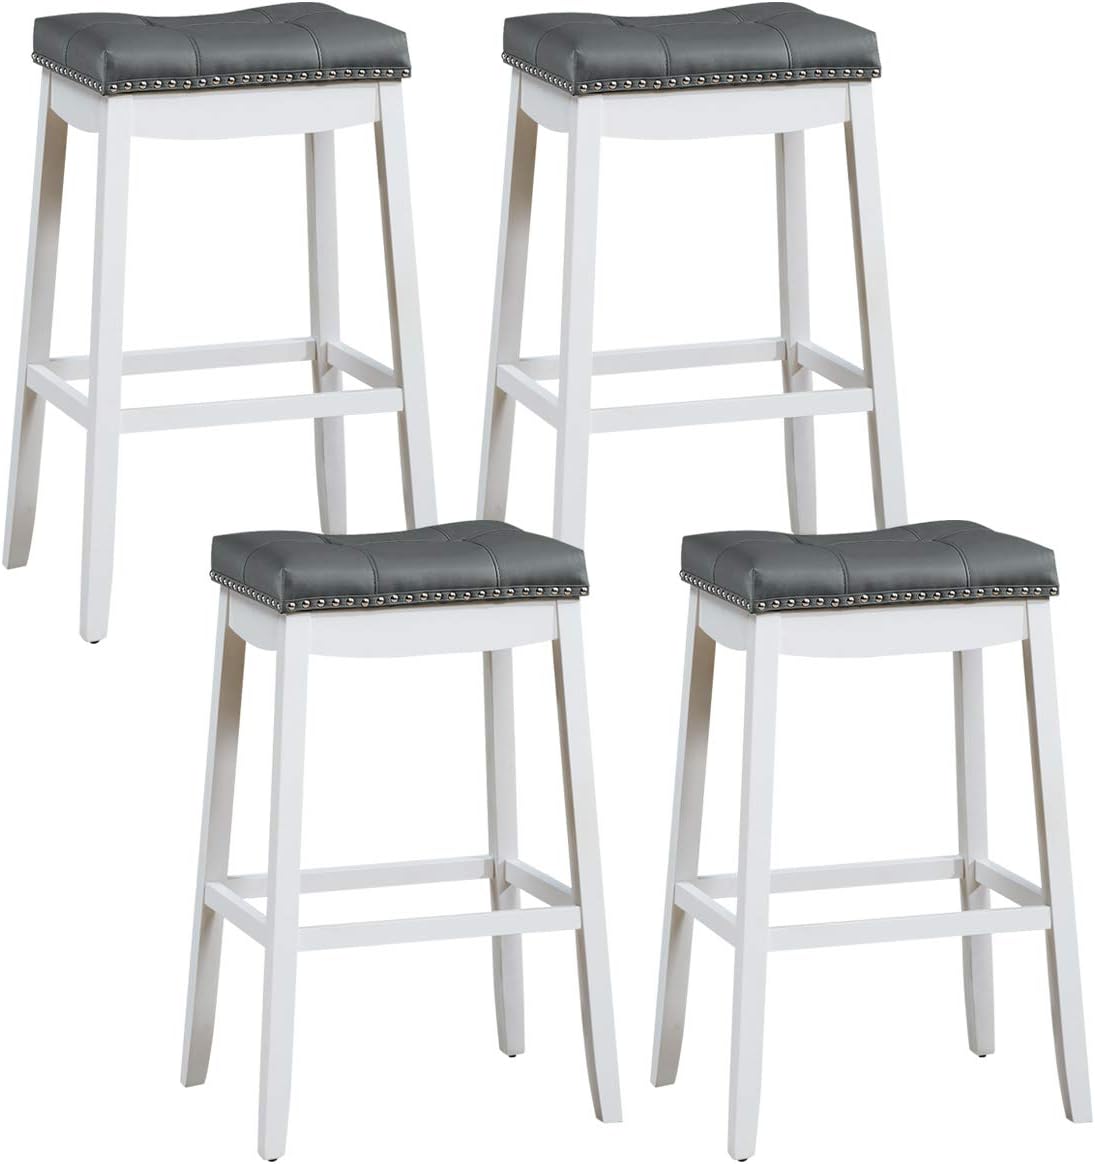 COSTWAY Bar Stools Set of 4, 29-Inch Height Backless Counter Stool with Footrest, Soft Seat Cushion, Wood Legs and Non-Slip Foot Pad, Saddle Stools for Home Kitchen Living Room, Stone Gray+White